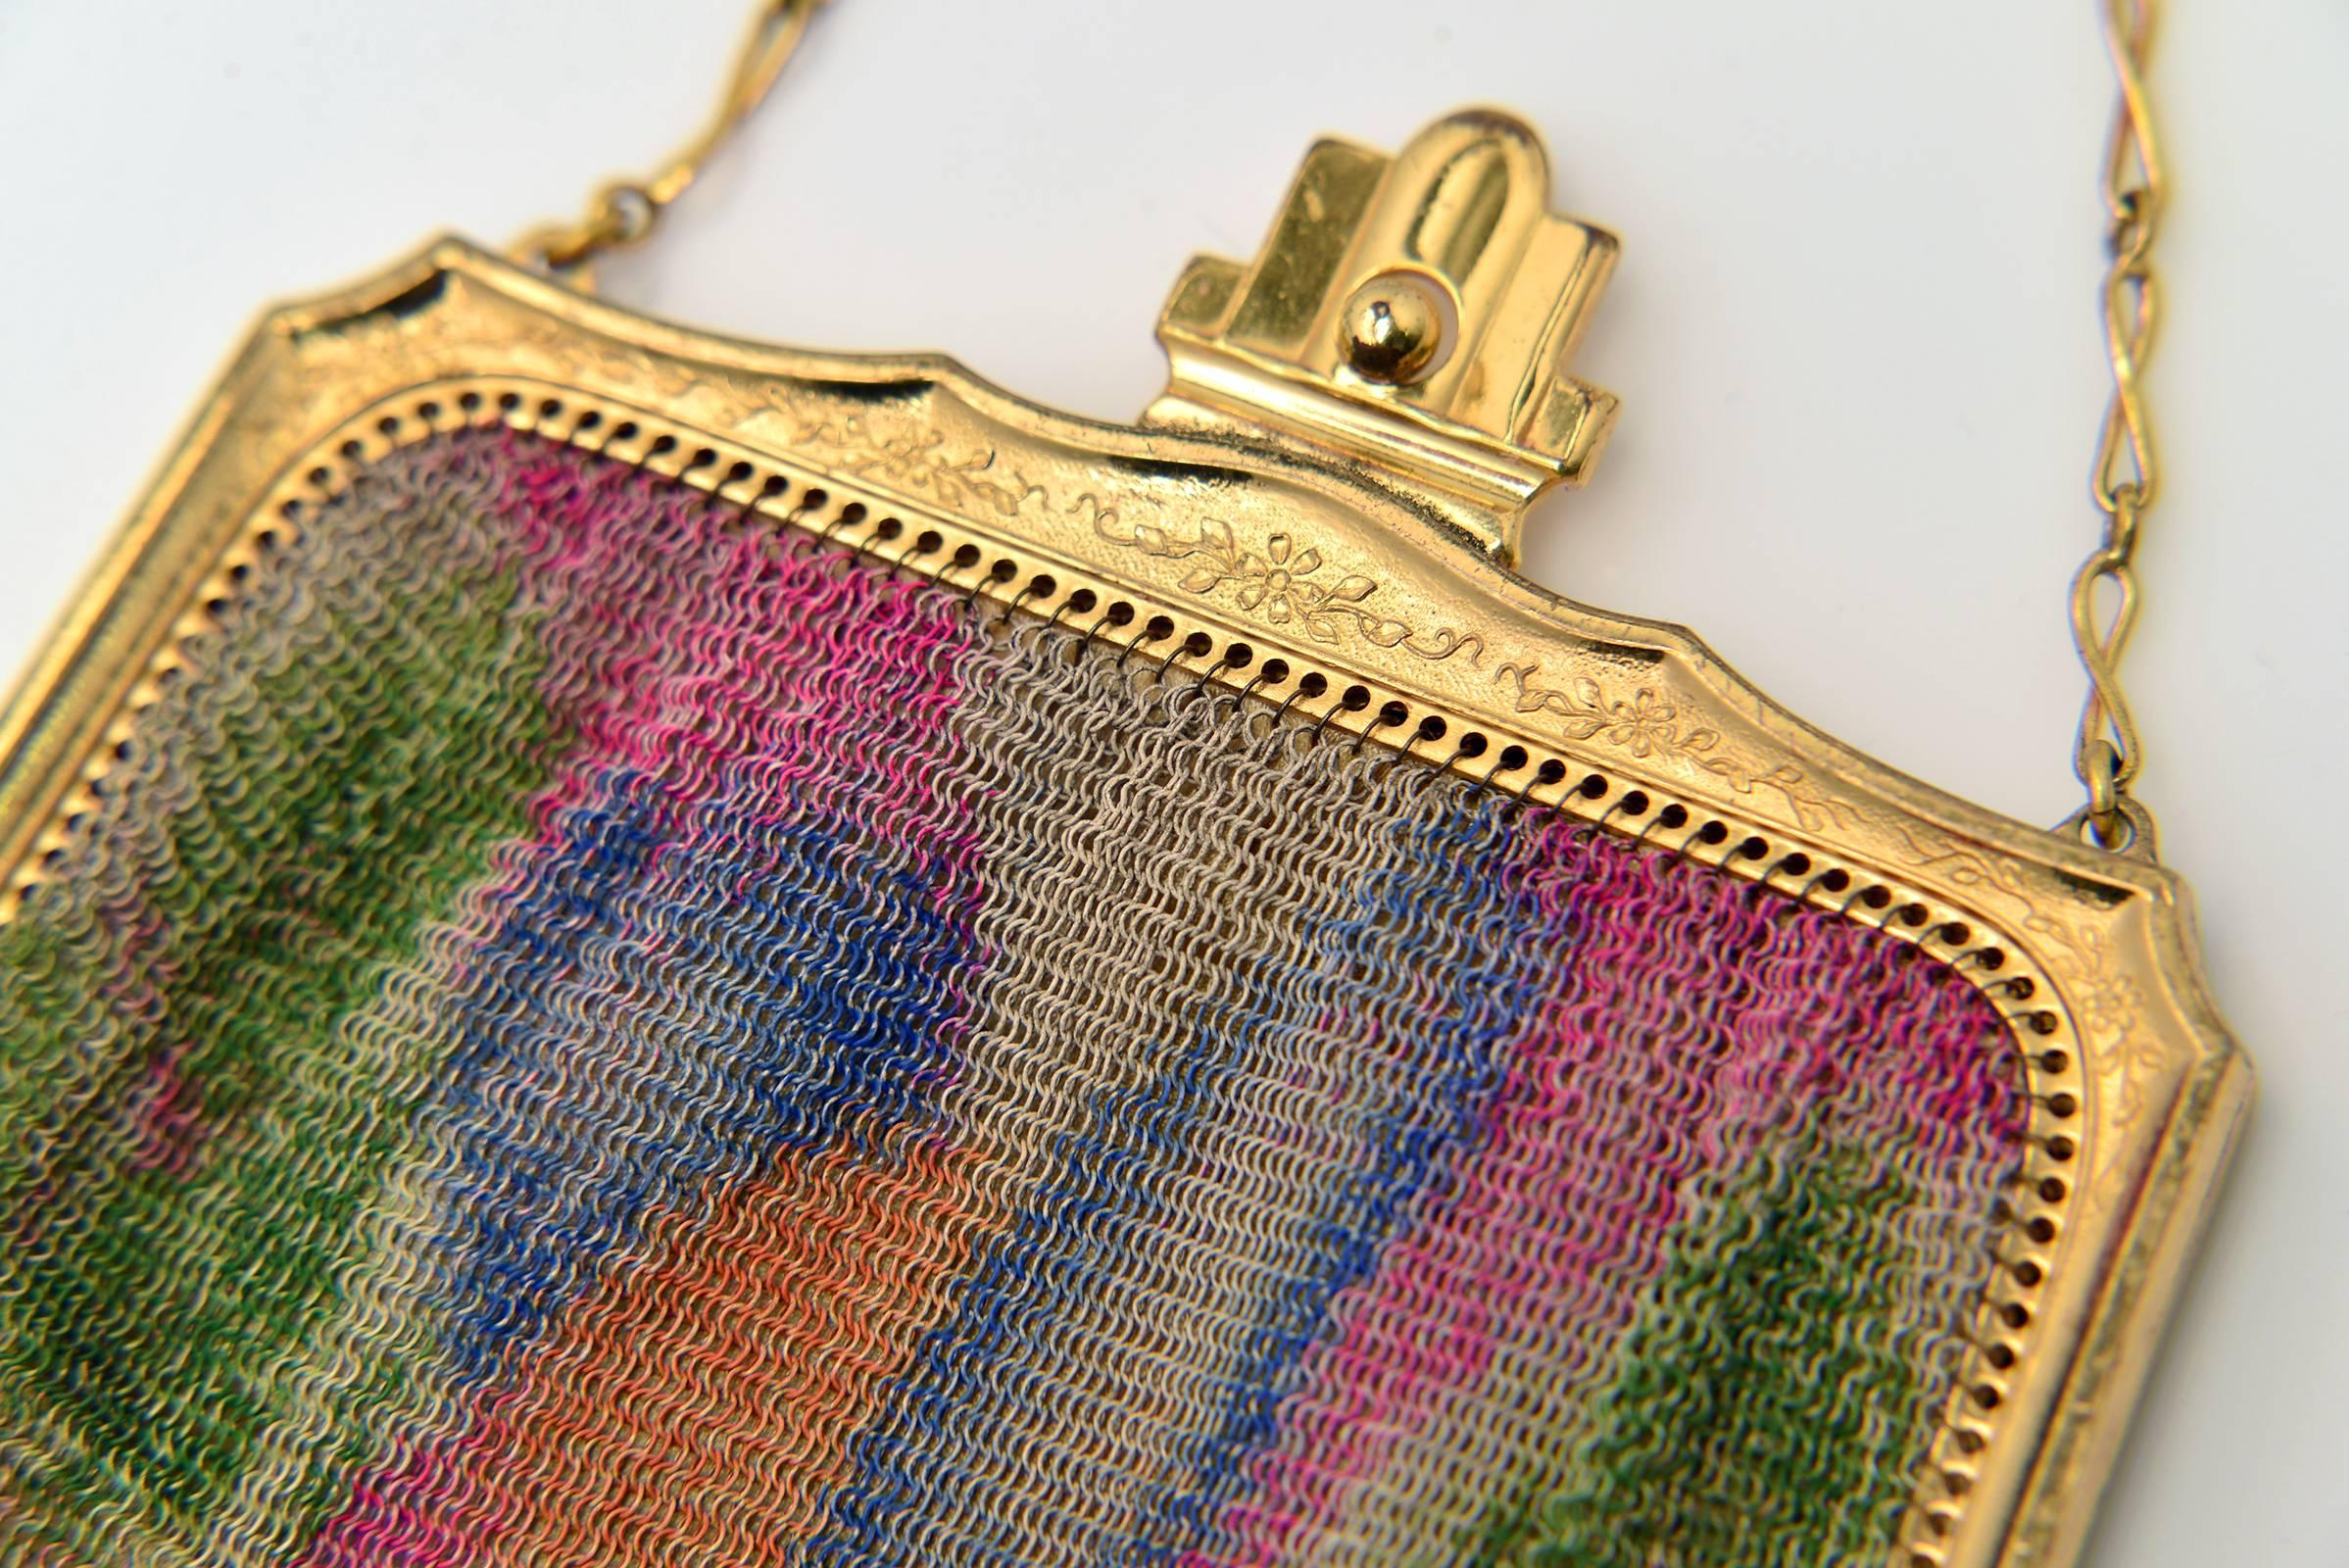 Highly collectible Whiting and Davis mesh purse. This hand bag features painted mesh with an Art Deco frame and a yellow silk satin lining. The Art Deco abstract motif is hot pink, blue, orange and green and on both front and back. The bag features